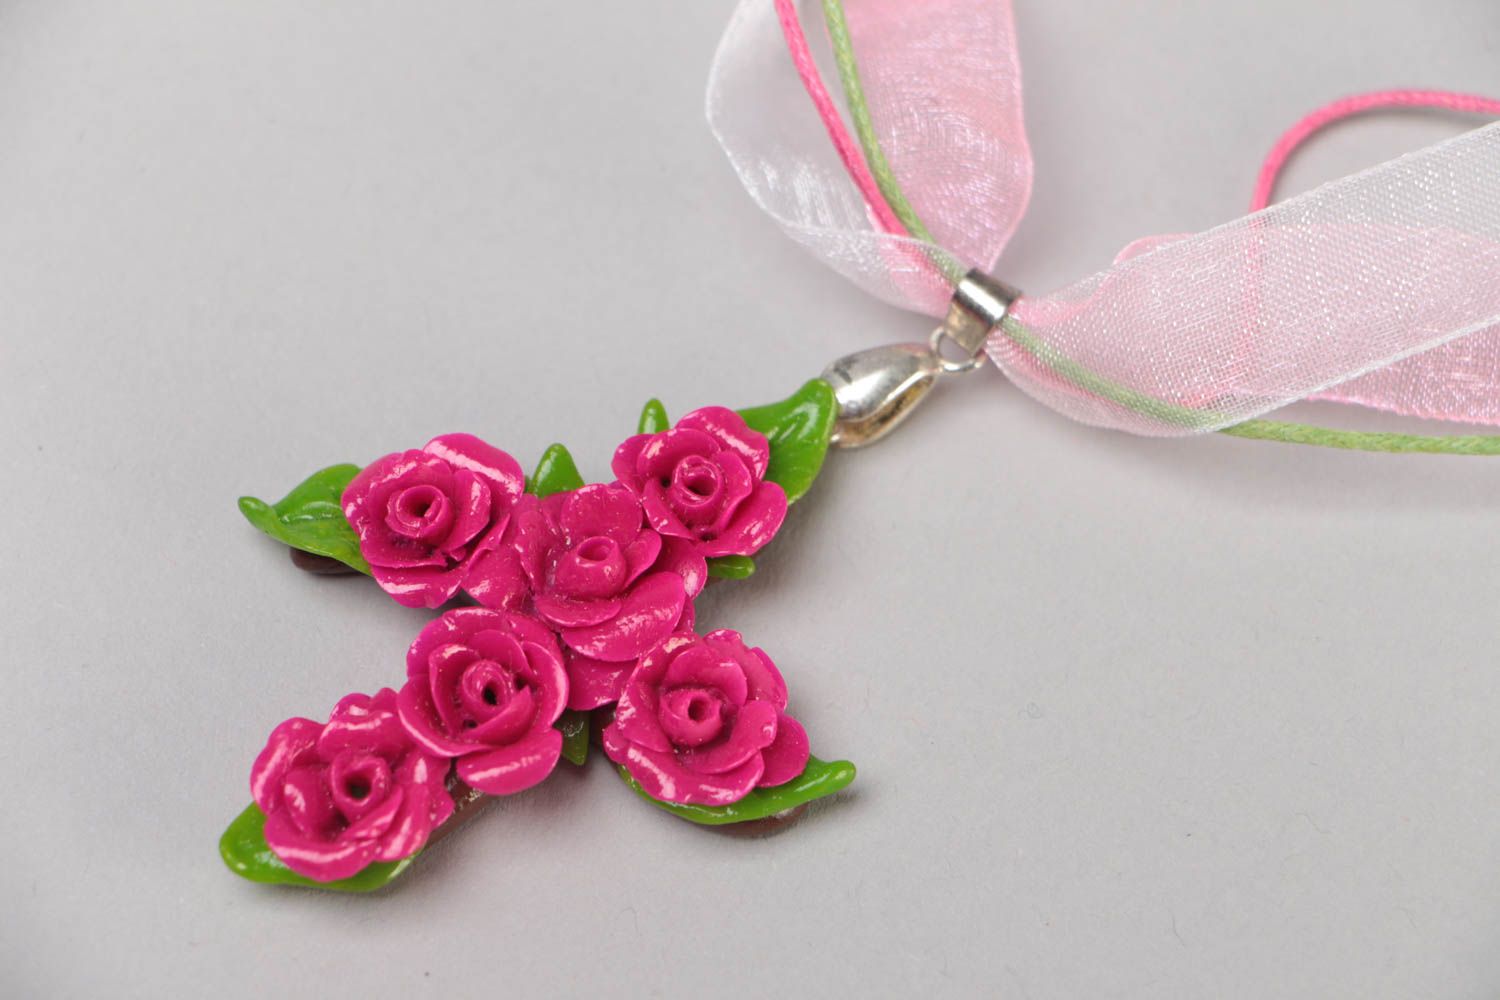 Handmade polymer clay bright pink floral cross pendant necklace on ribbons photo 3